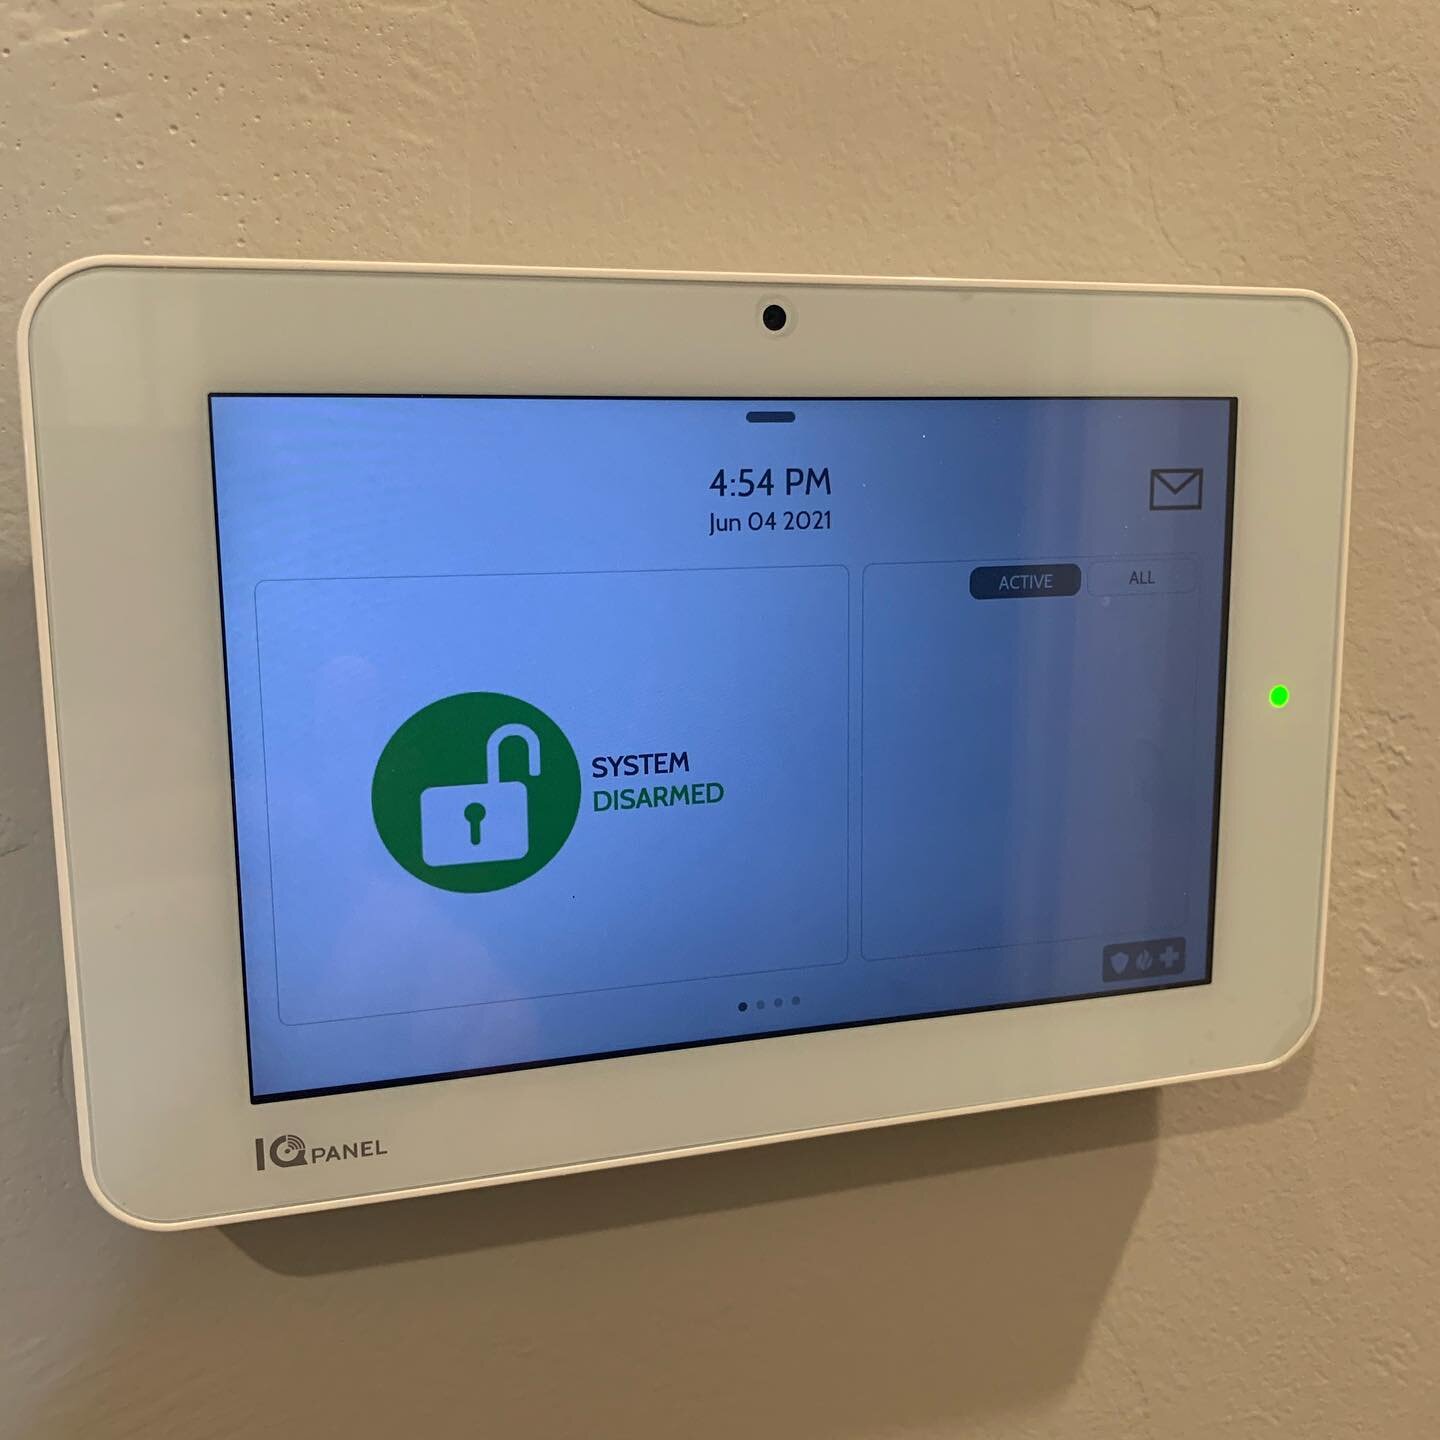 Quickie with the Qolsys! One of my customer moved into a new home with a Qolsys IQ2+ panel. They liked their new security system but wanted to use their old security company! What a blessing! We matched the new company&rsquo;s promo but it is well wo